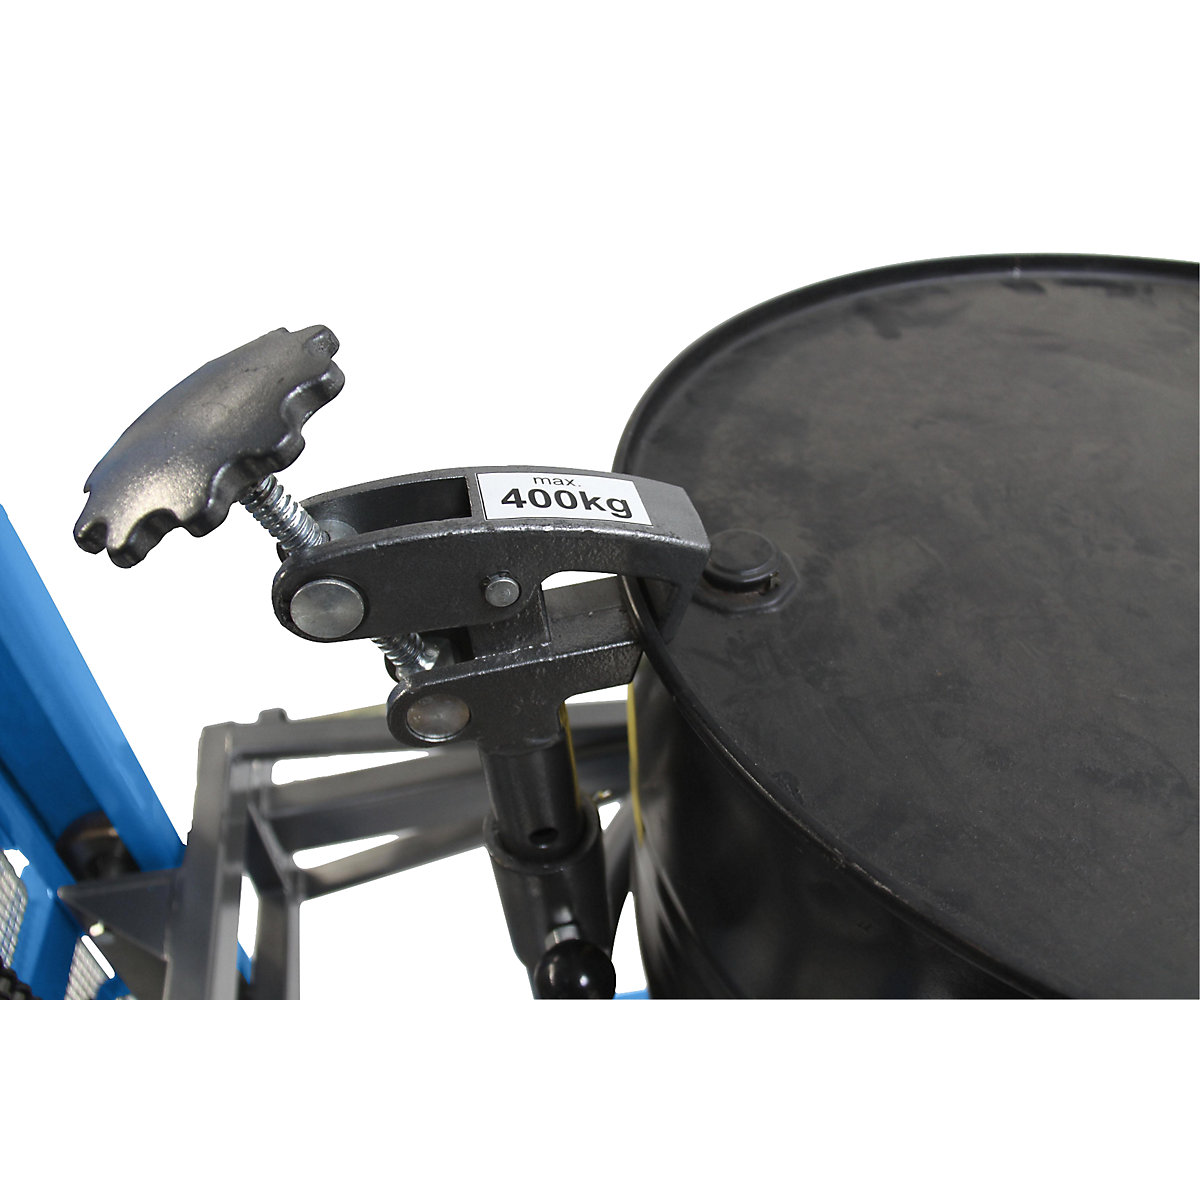 Drum lifting and tilting unit (Product illustration 2)-1